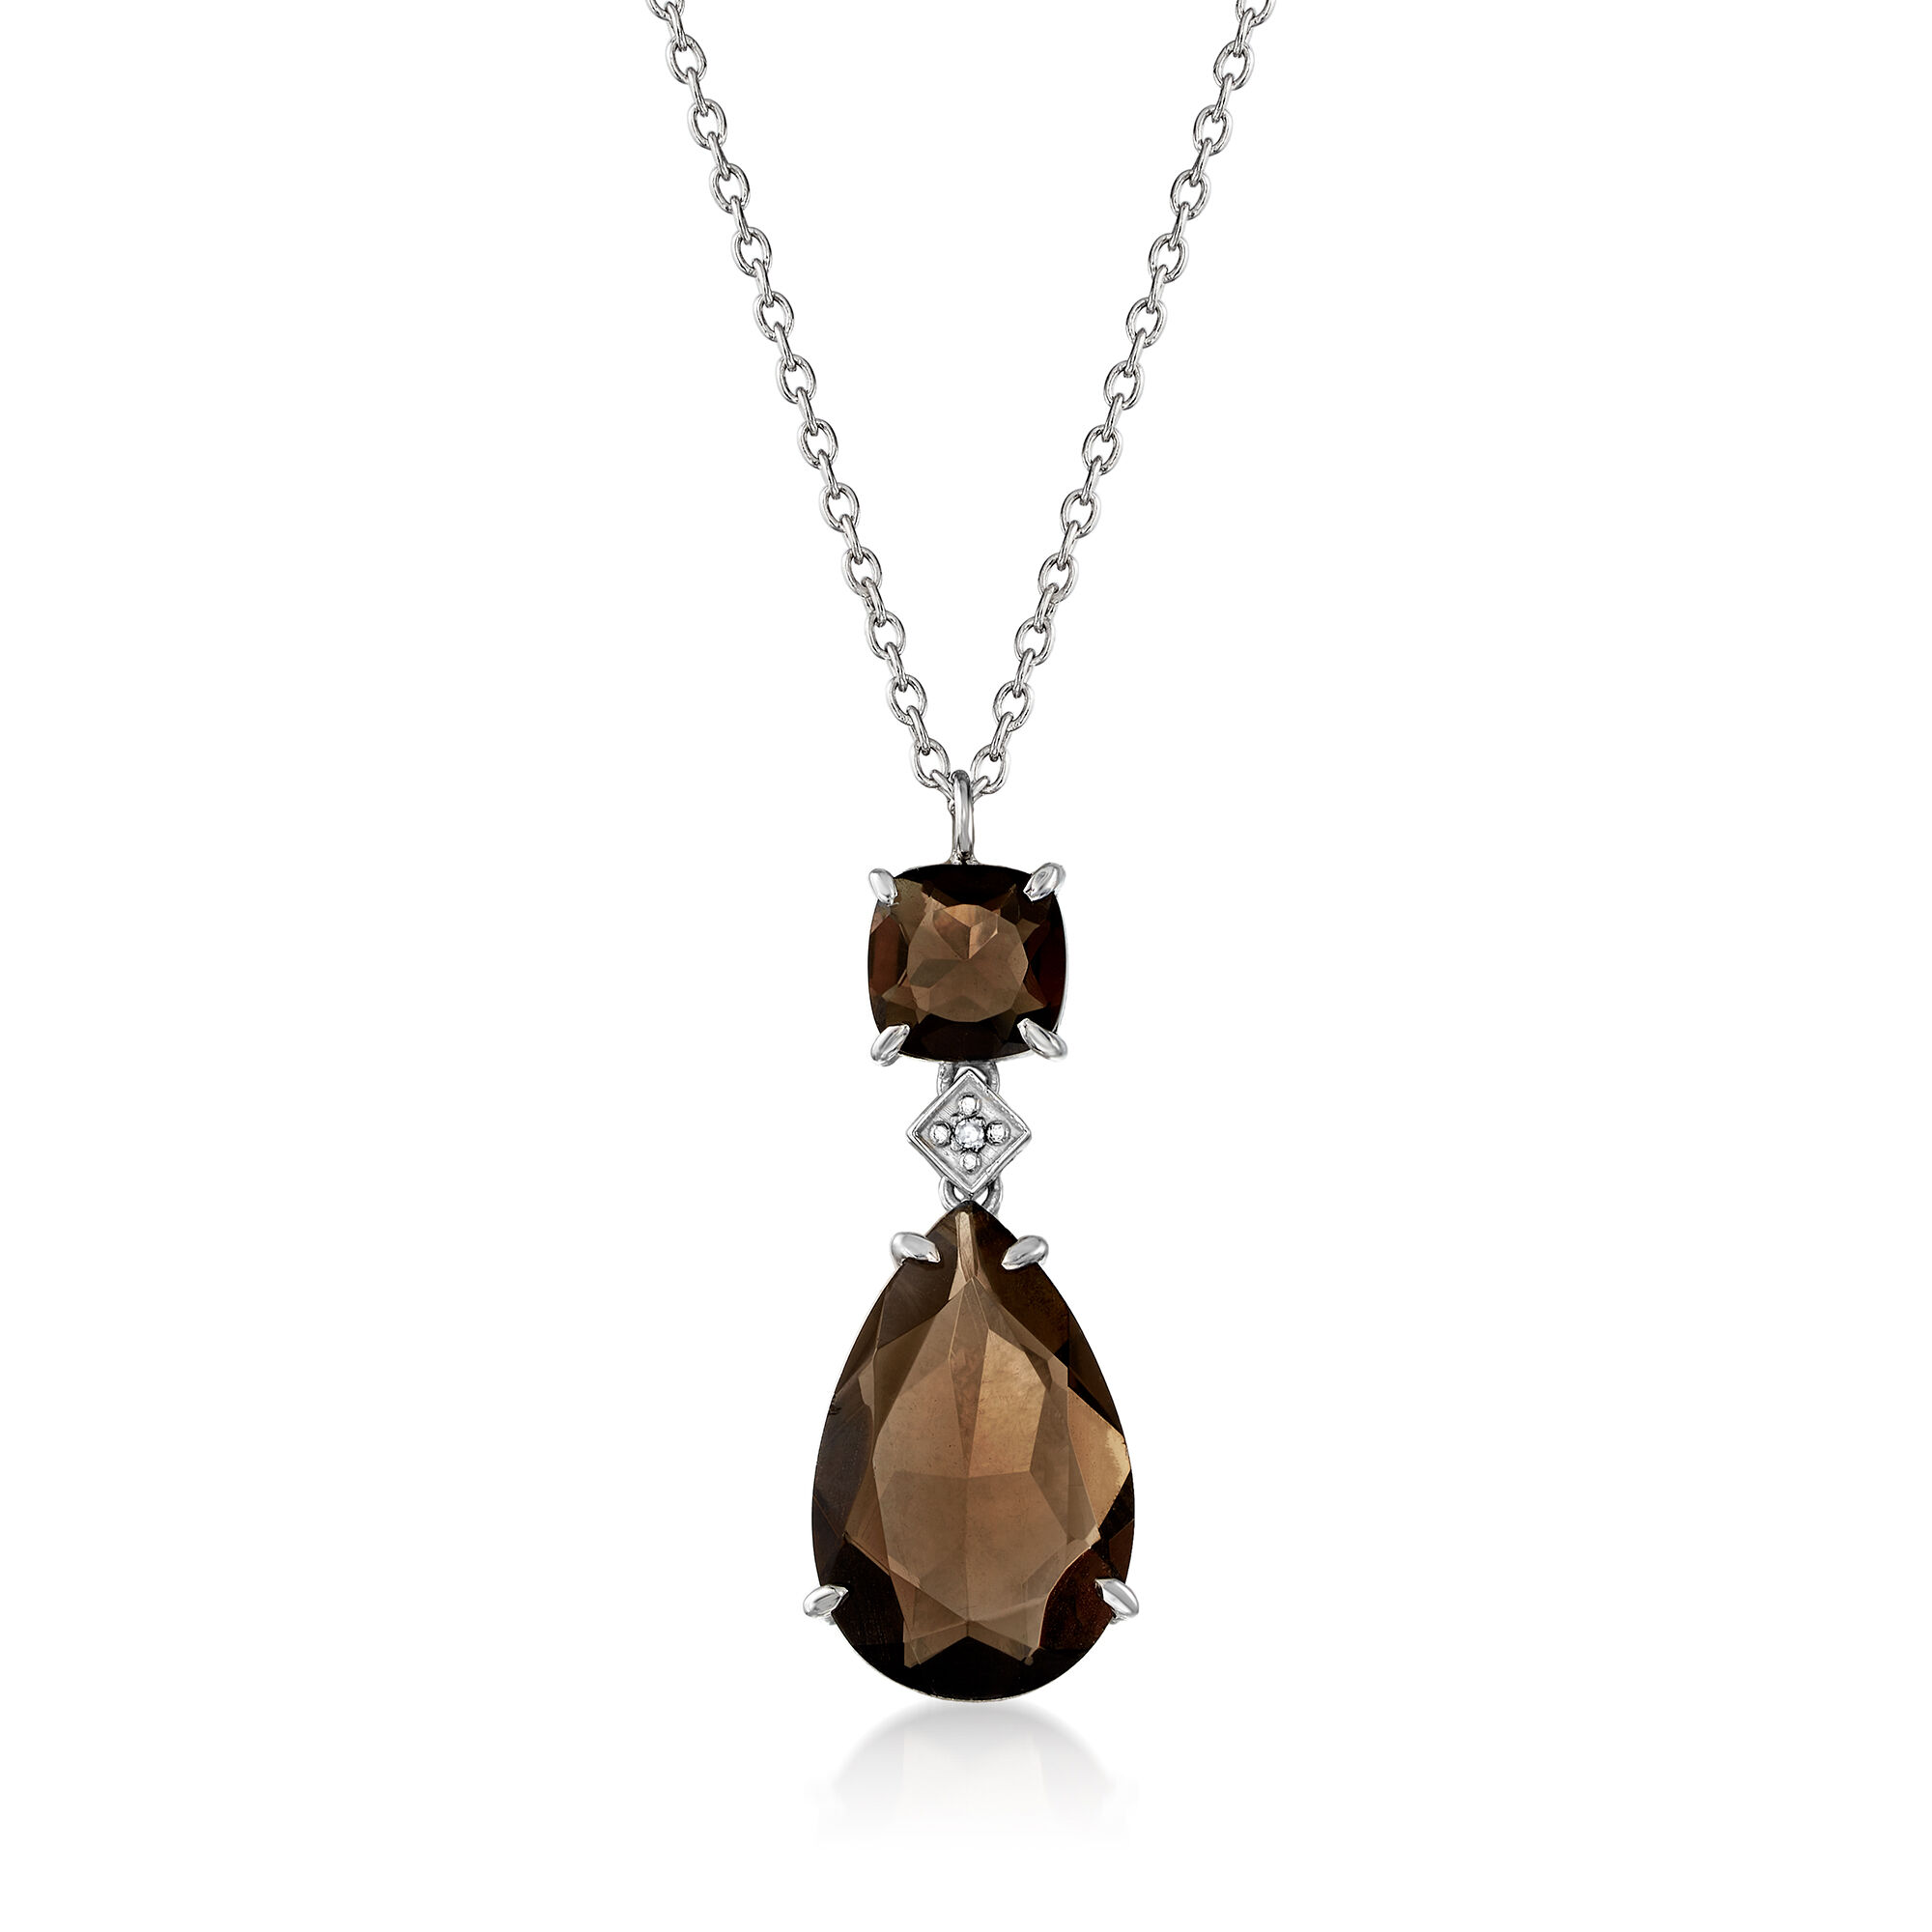 Buy PH Artistic Necklace 925 Sterling Silver Smoky Topaz Gem Stone Handmade  Gift Women D148 at Amazon.in